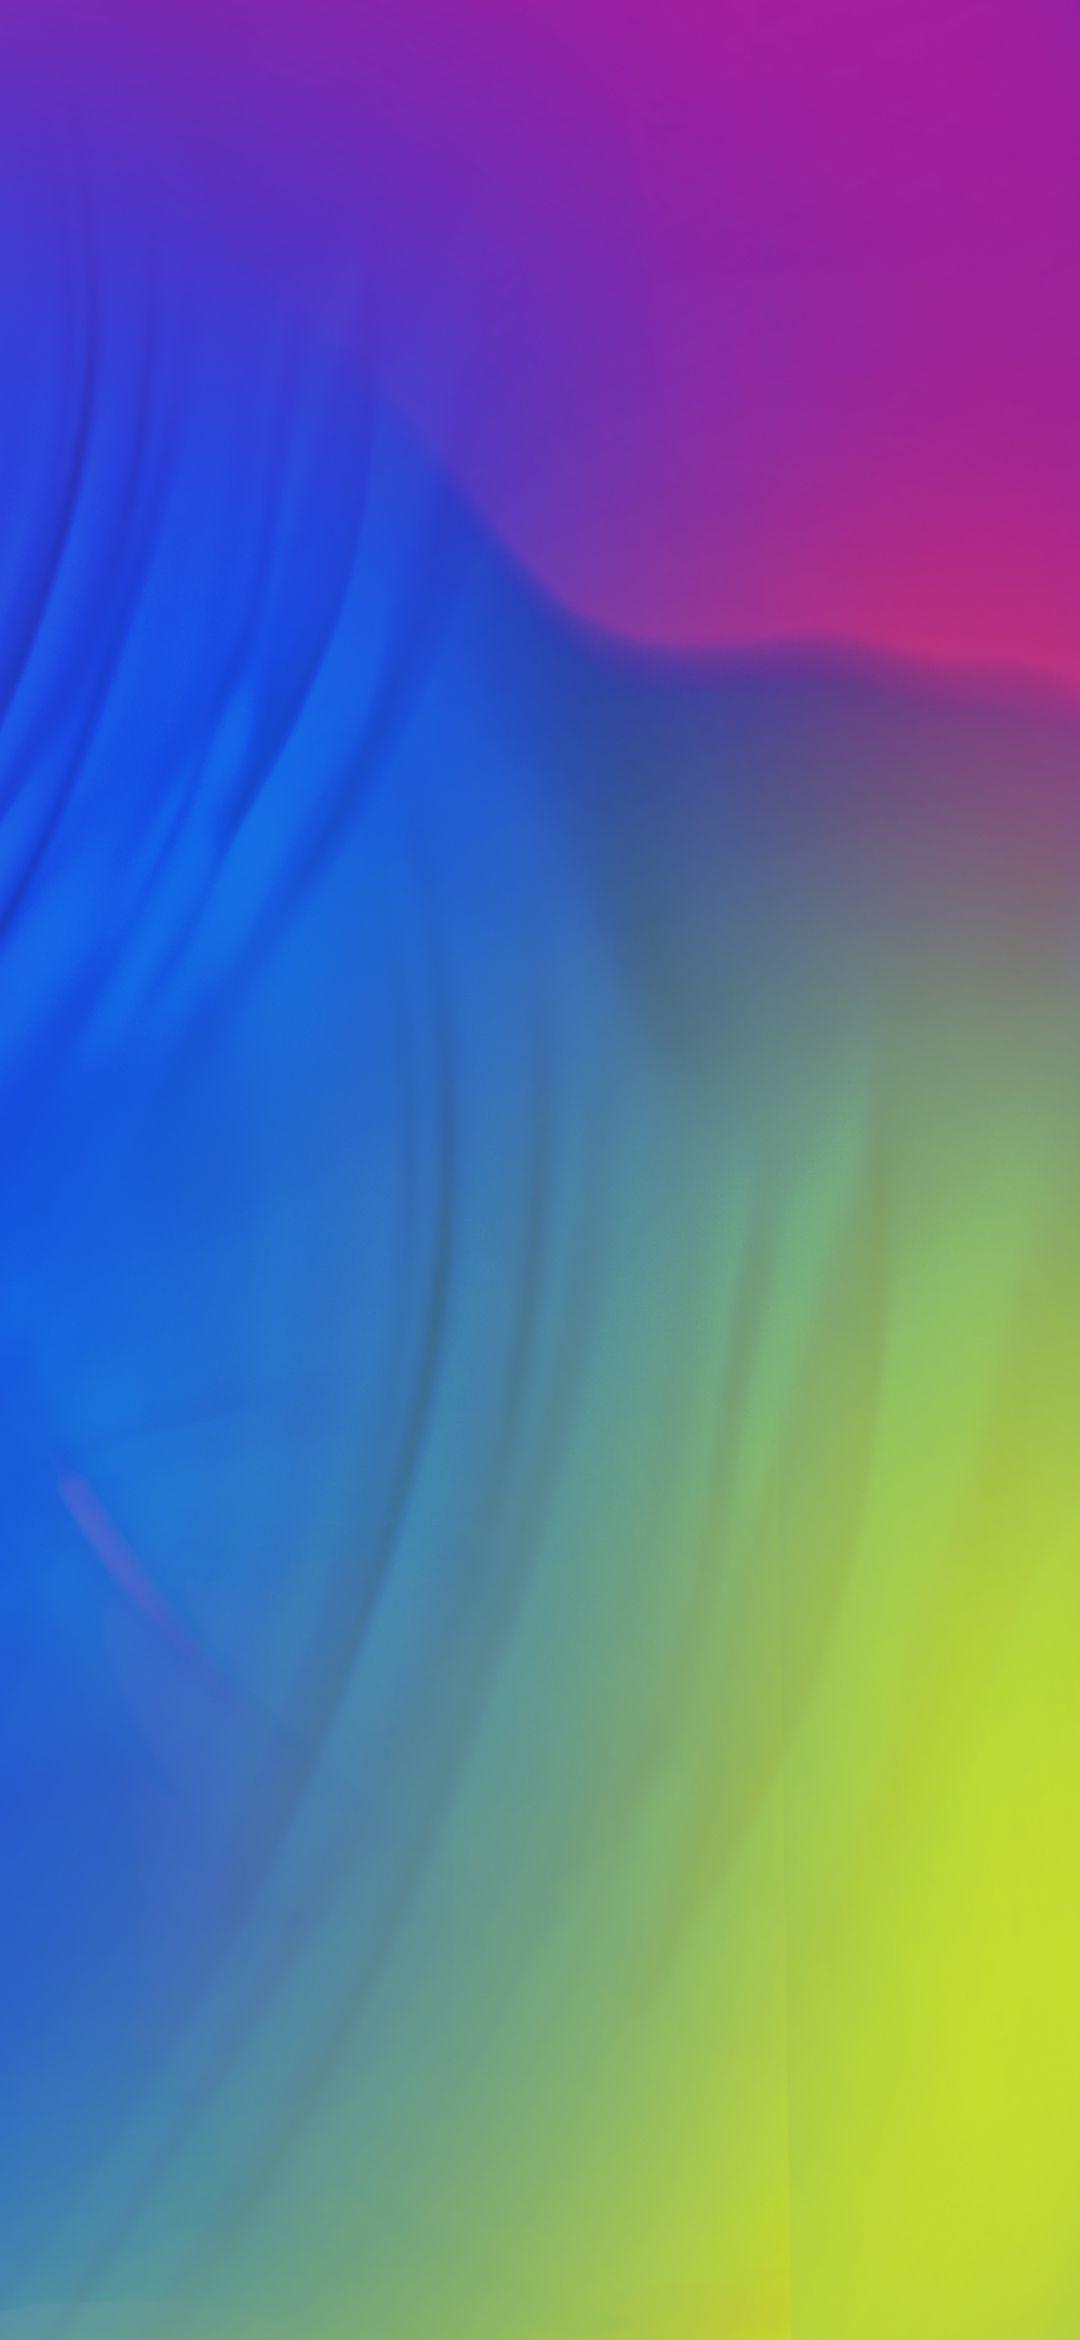 Download Samsung Galaxy M40 Official Wallpaper Here! Full HD